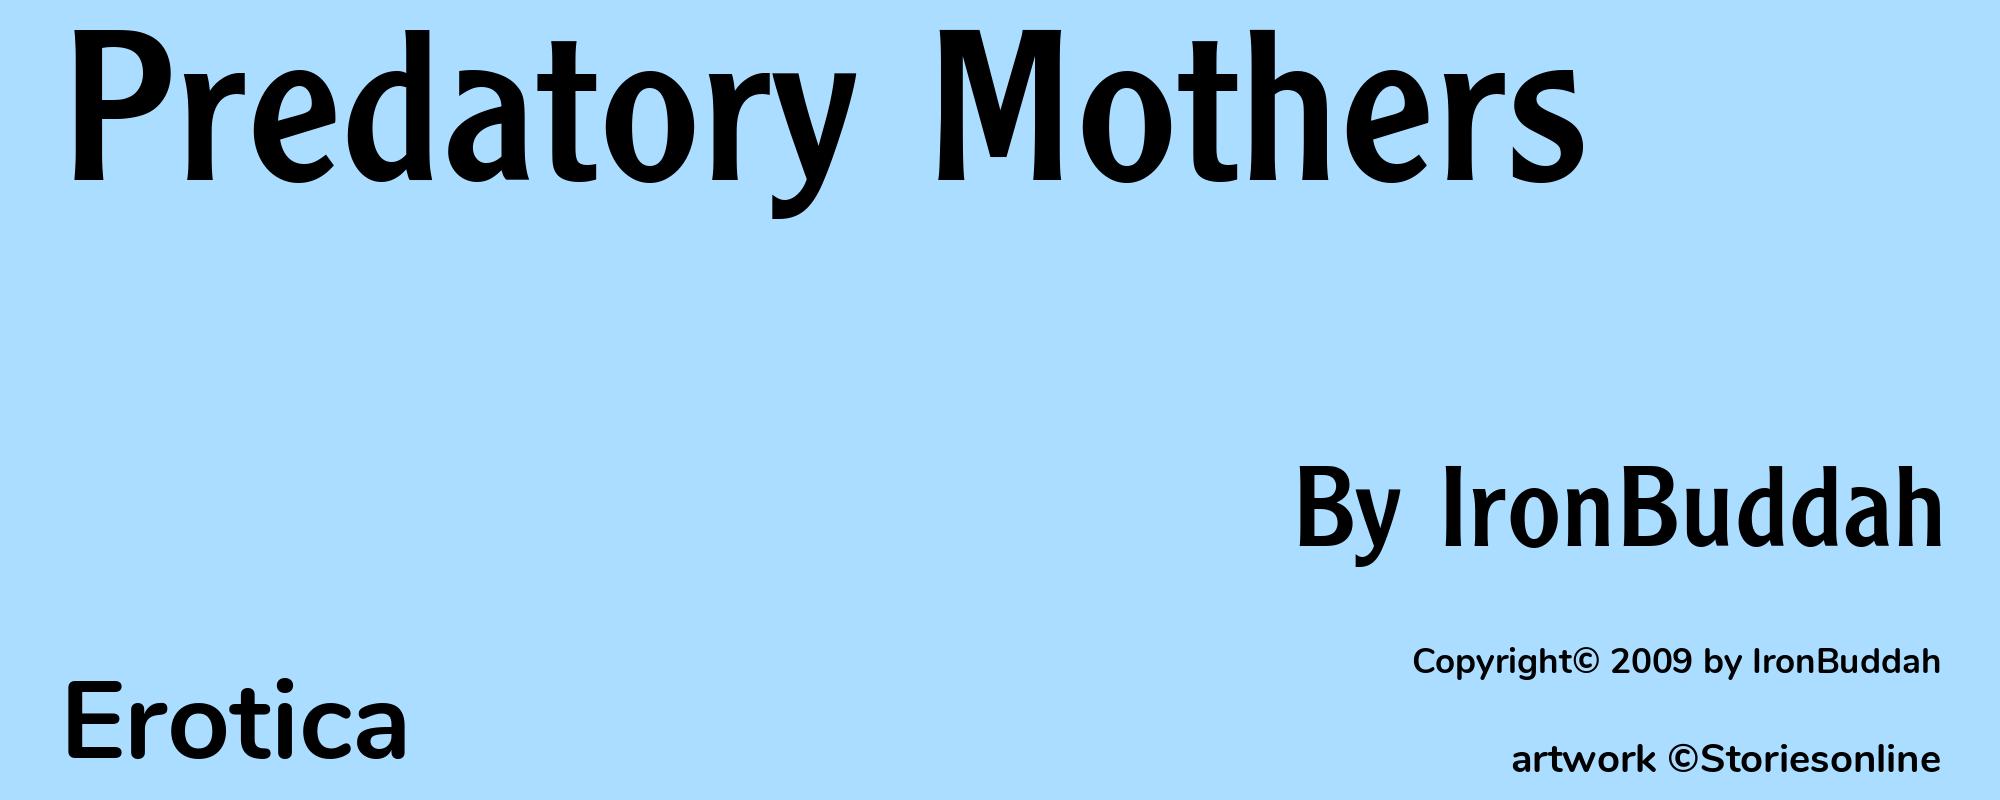 Predatory Mothers - Cover